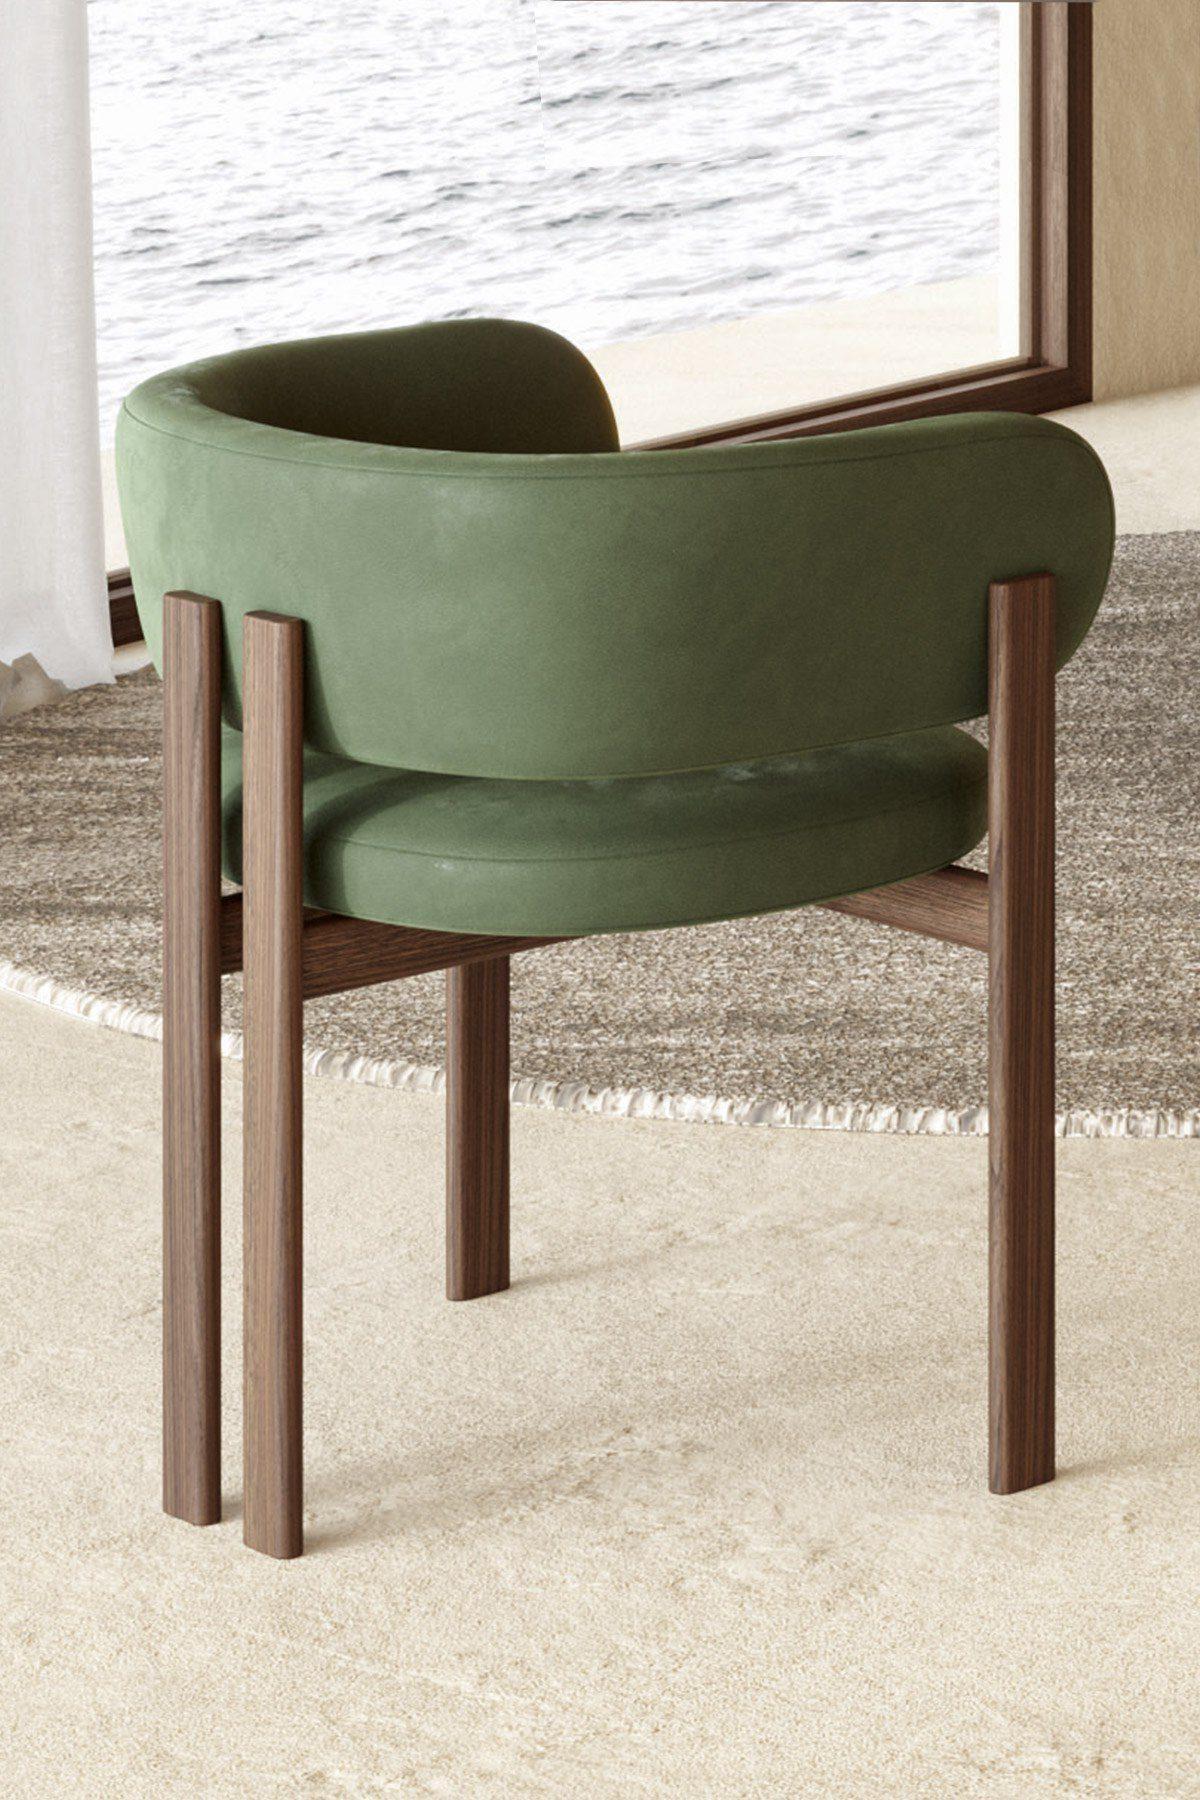 BAY WOOD ARMCHAIR by NATUREDESIGN